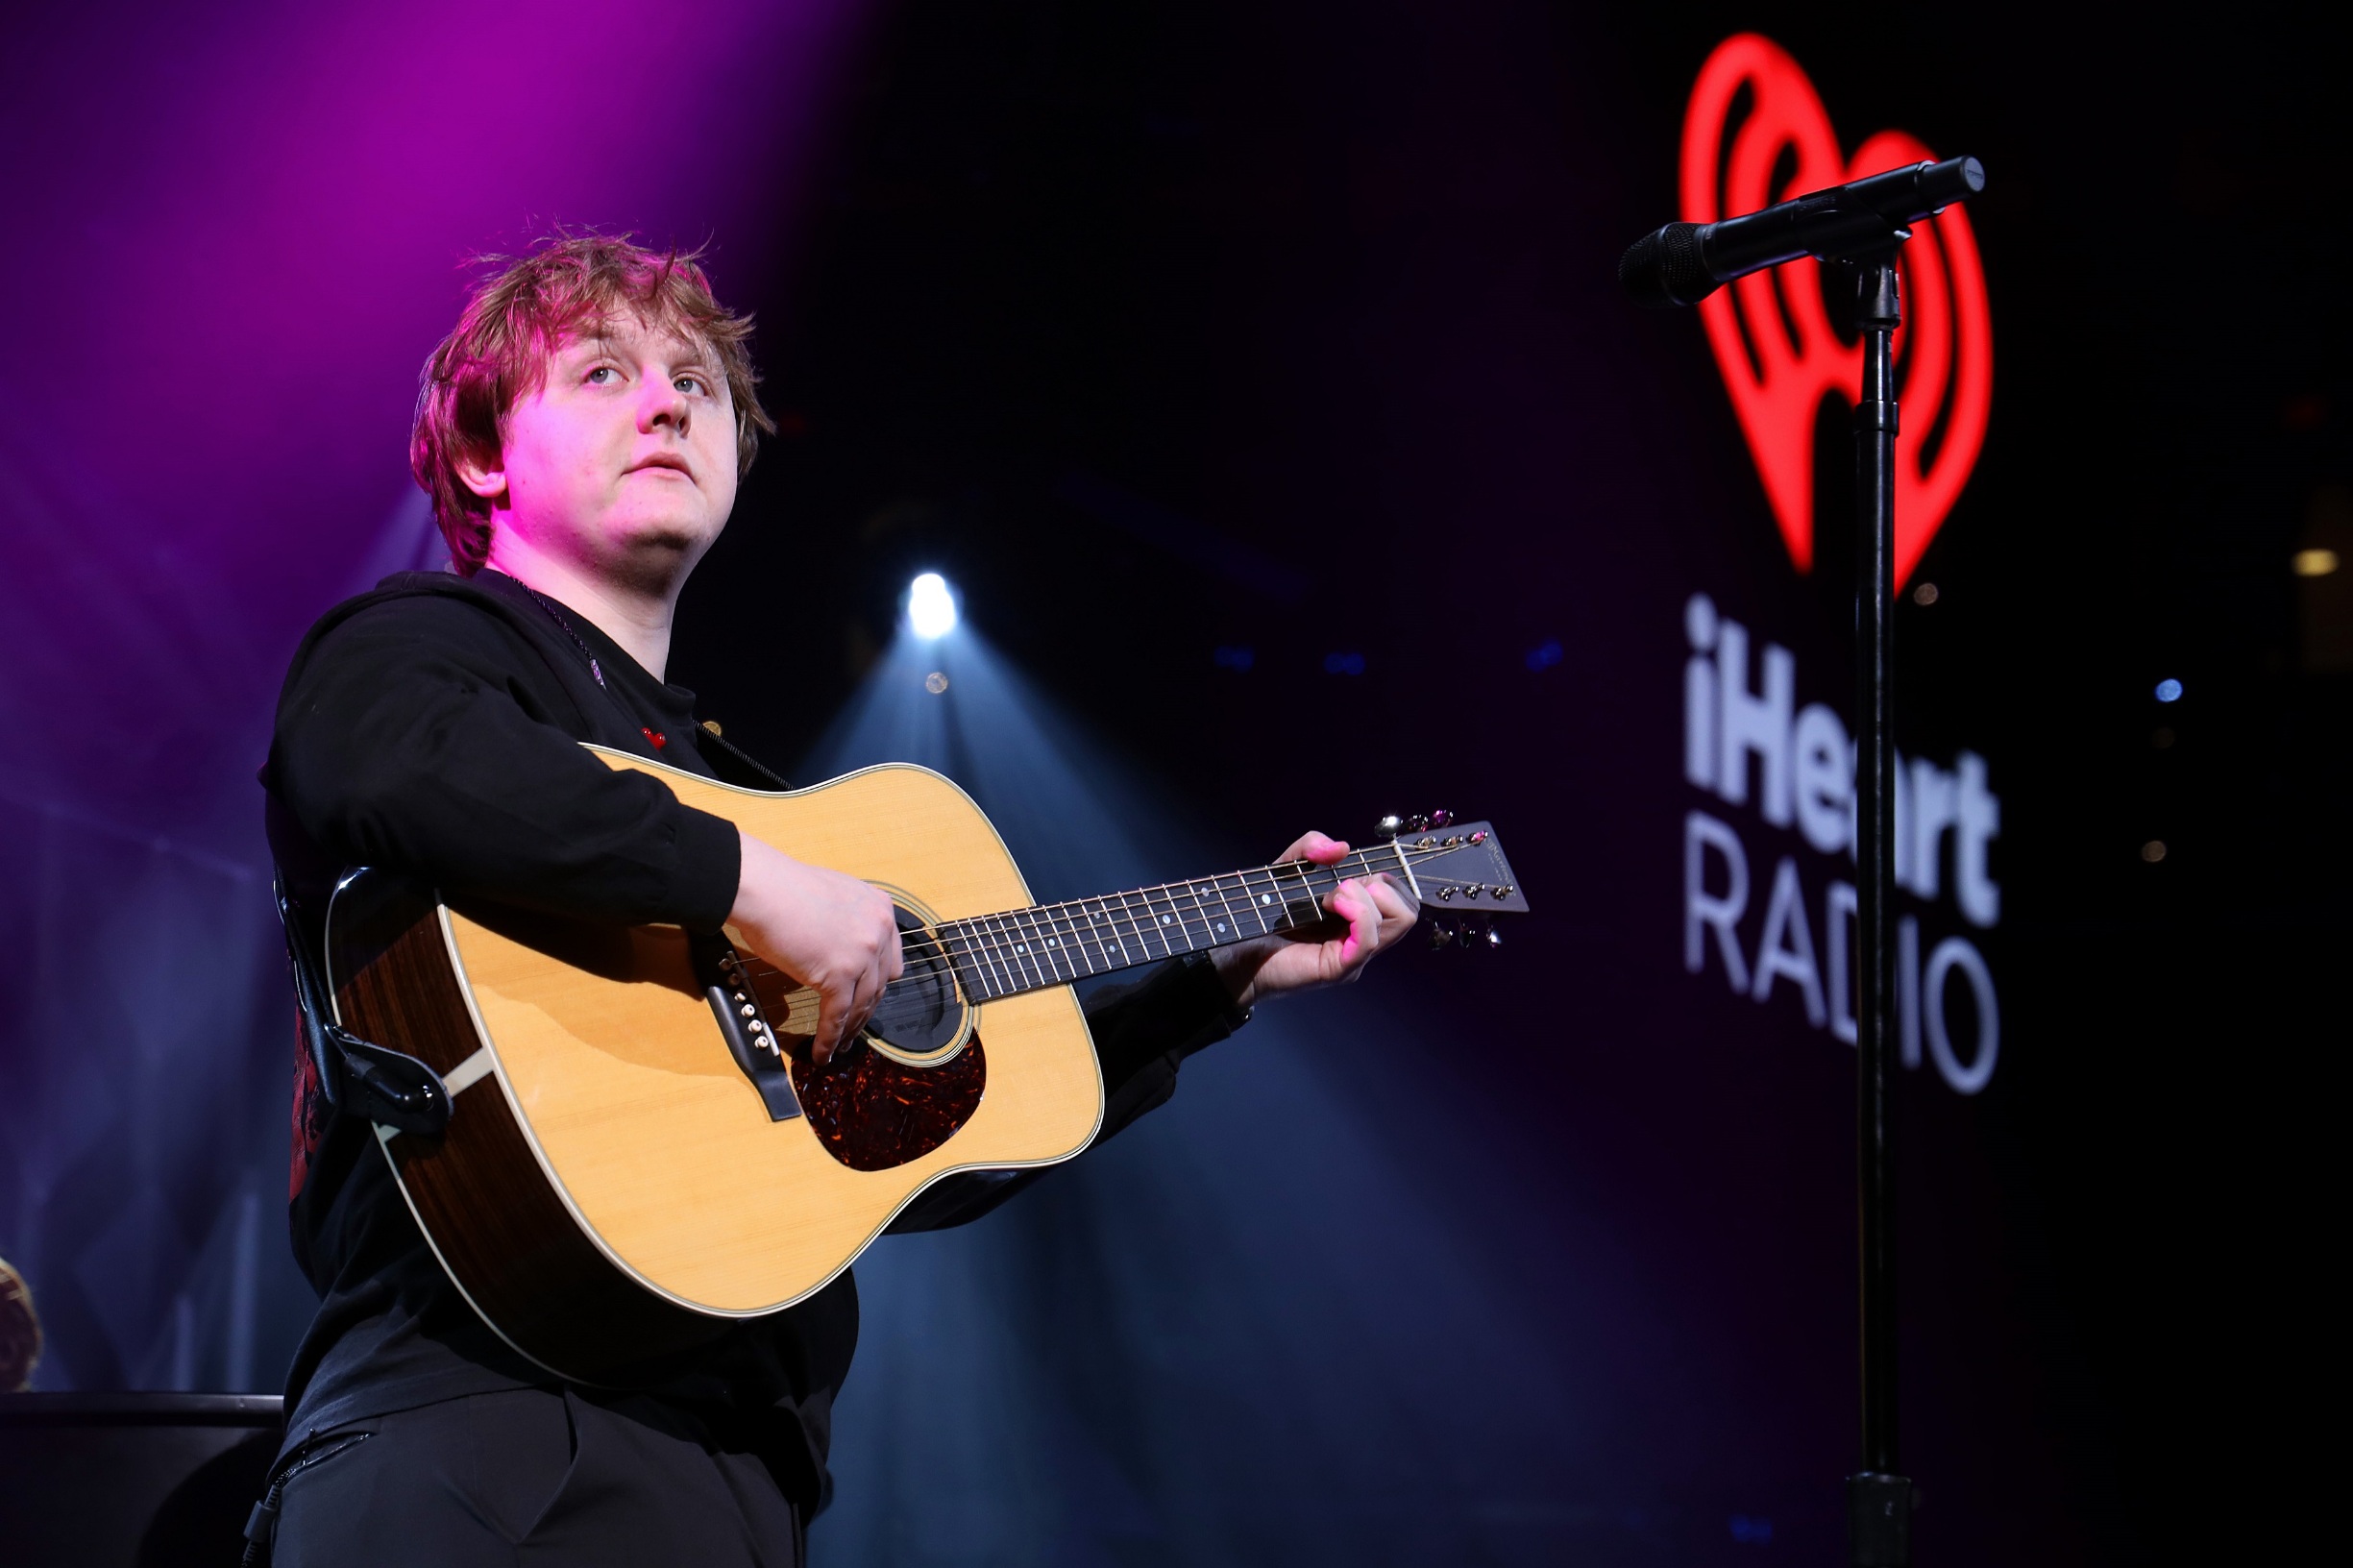 WASHINGTON, DC - DECEMBER 16: Lewis Capaldi performs onstage during HOT 99.5's Jingle Ball 2019 on December 16, 2019 in Washington, DC. (Photo by Tasos Katopodis/Getty Images for iHeartMedia)